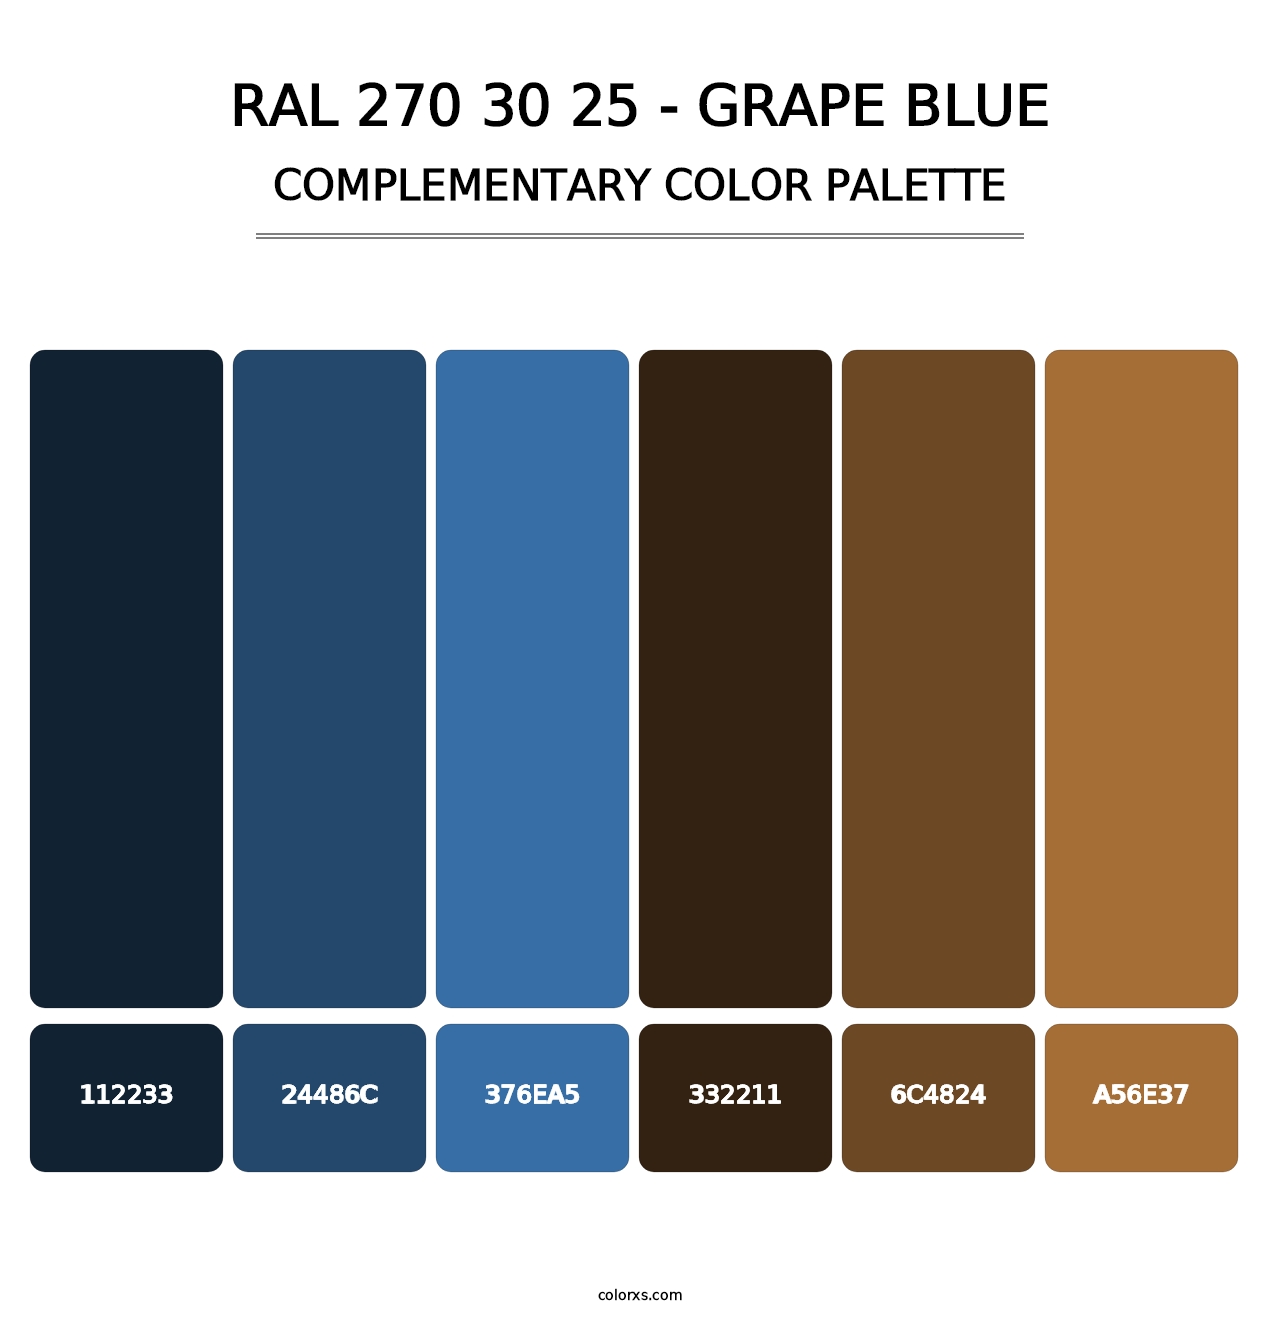 RAL 270 30 25 - Grape Blue - Complementary Color Palette